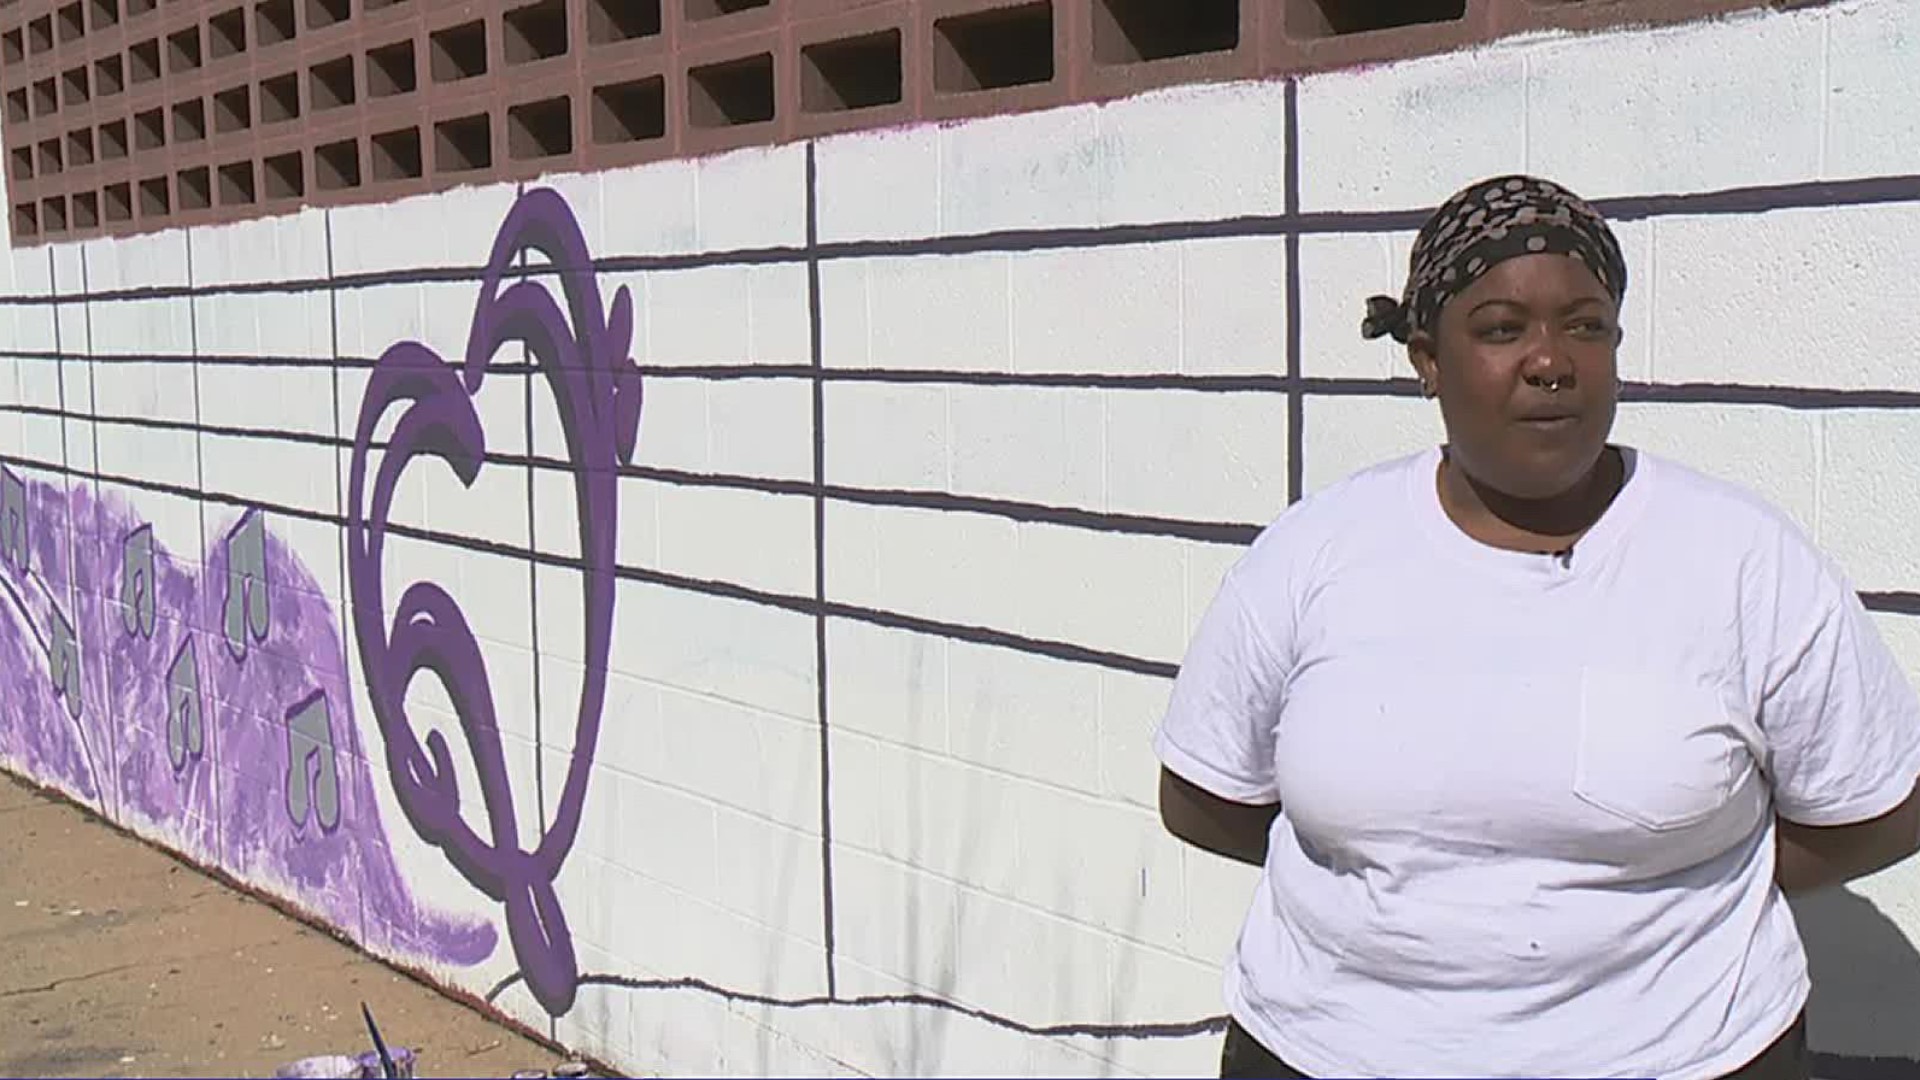 Kearasten Jordan is one of several artists commissioned by local arts organization Music for Everyone to create a music-themed mural in the Red Rose City.